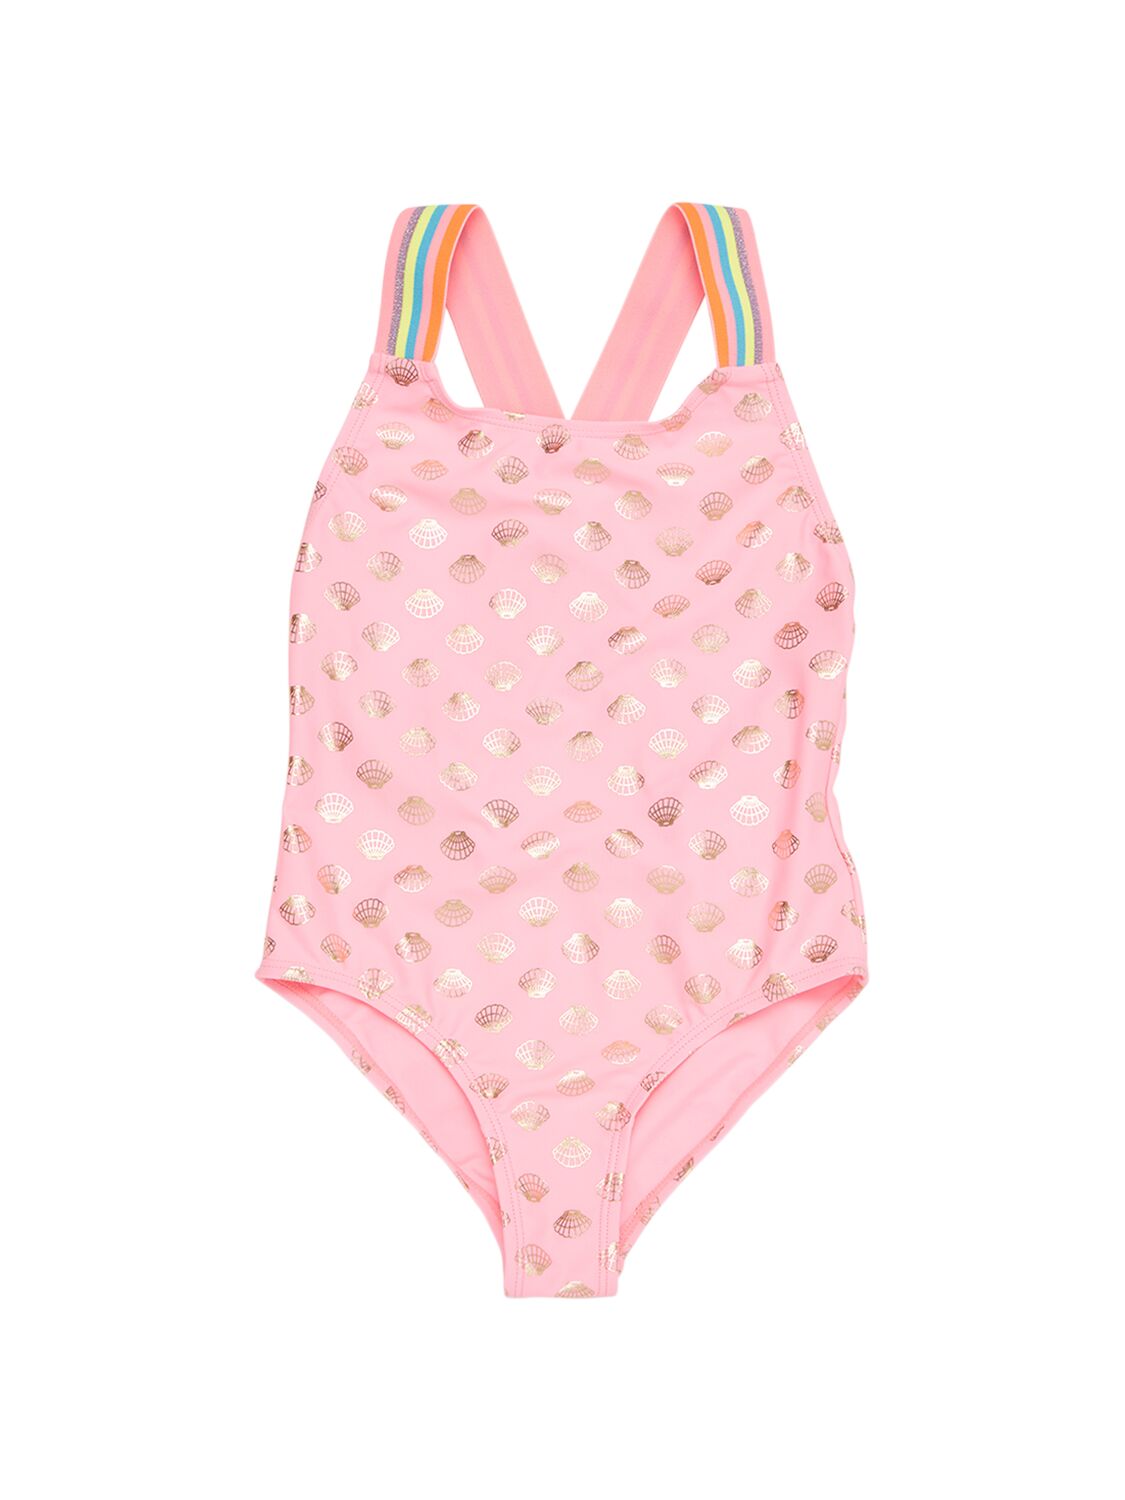 Image of Shell Print Lycra One-piece Swimsuit